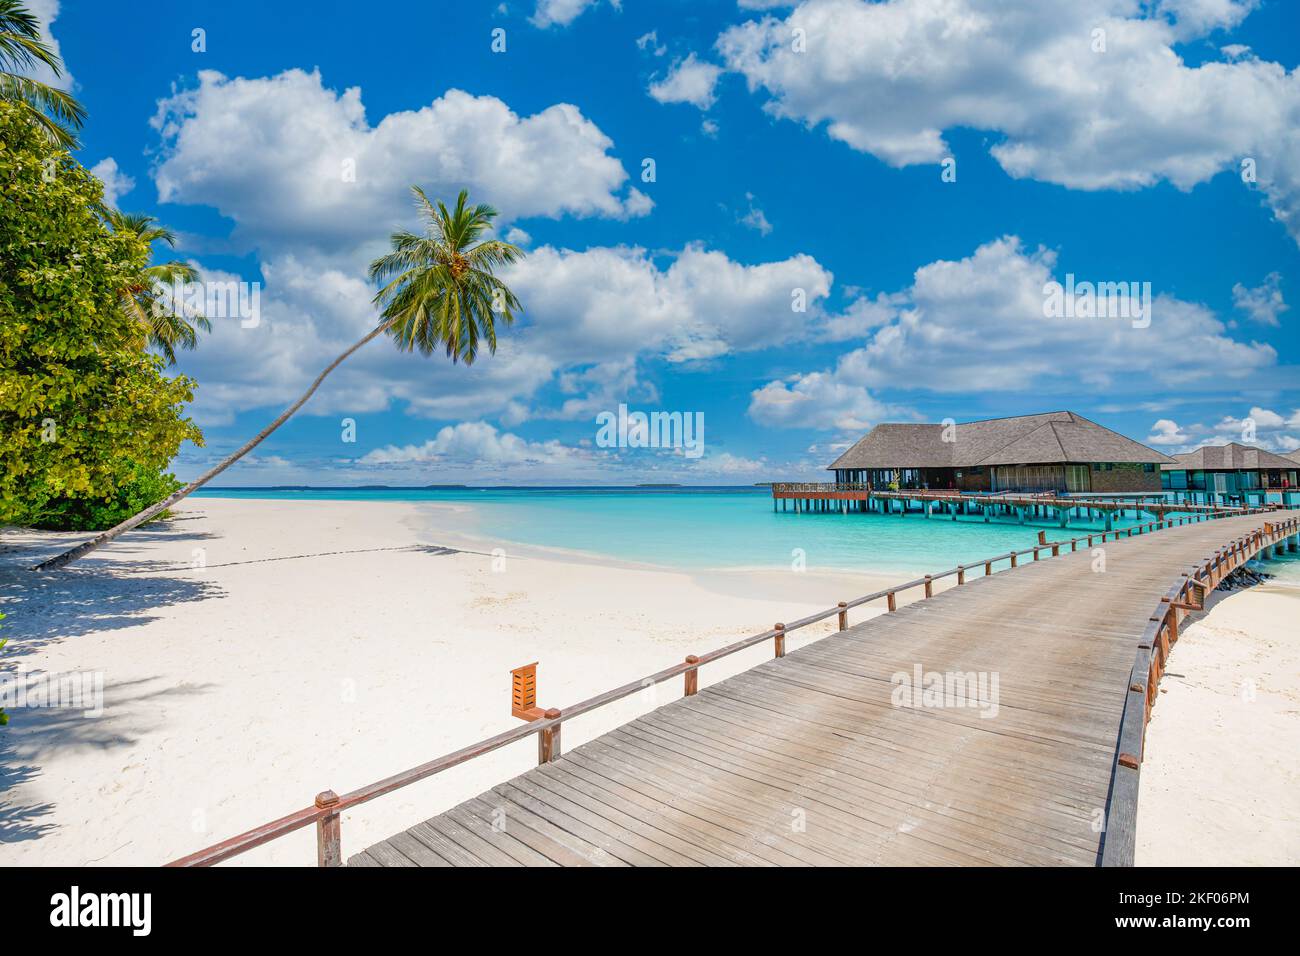 Overwater bungalow in the Indian Ocean. Pier palm trees white sand villas with amazing green lagoon scenic beach view. Picturesque travel landscape Stock Photo